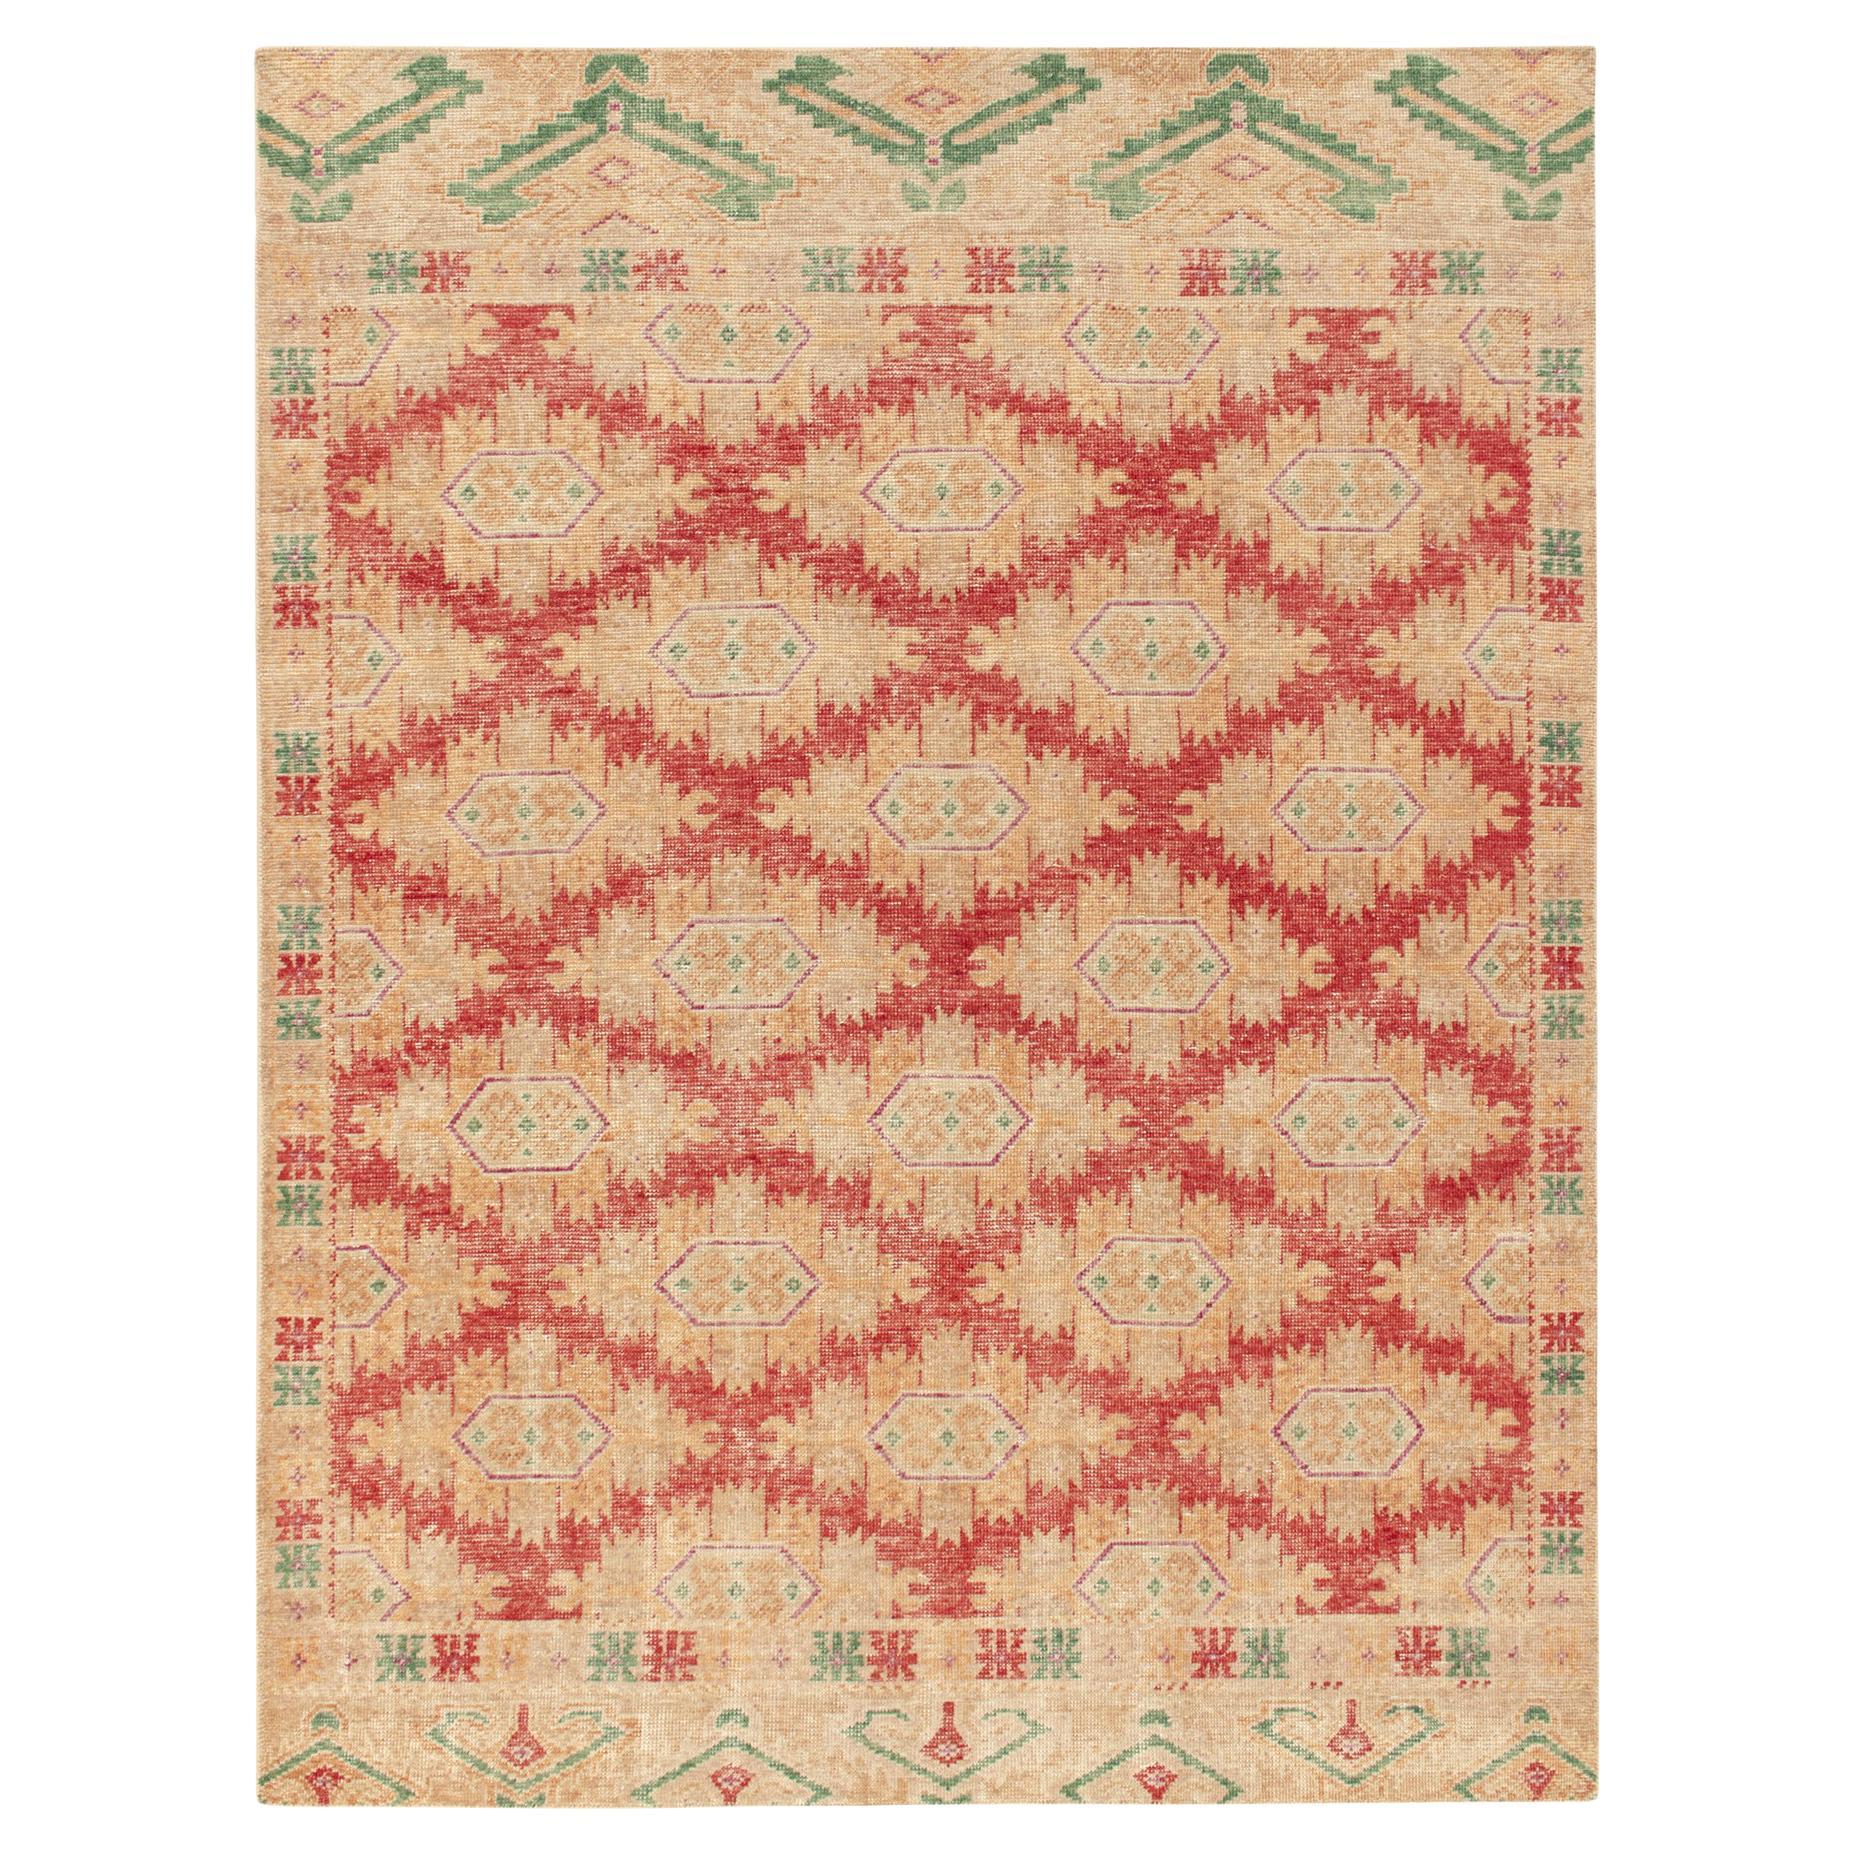 Rug & Kilim's Distressed Style Rug in Red, Gold, Green Geometric Pattern